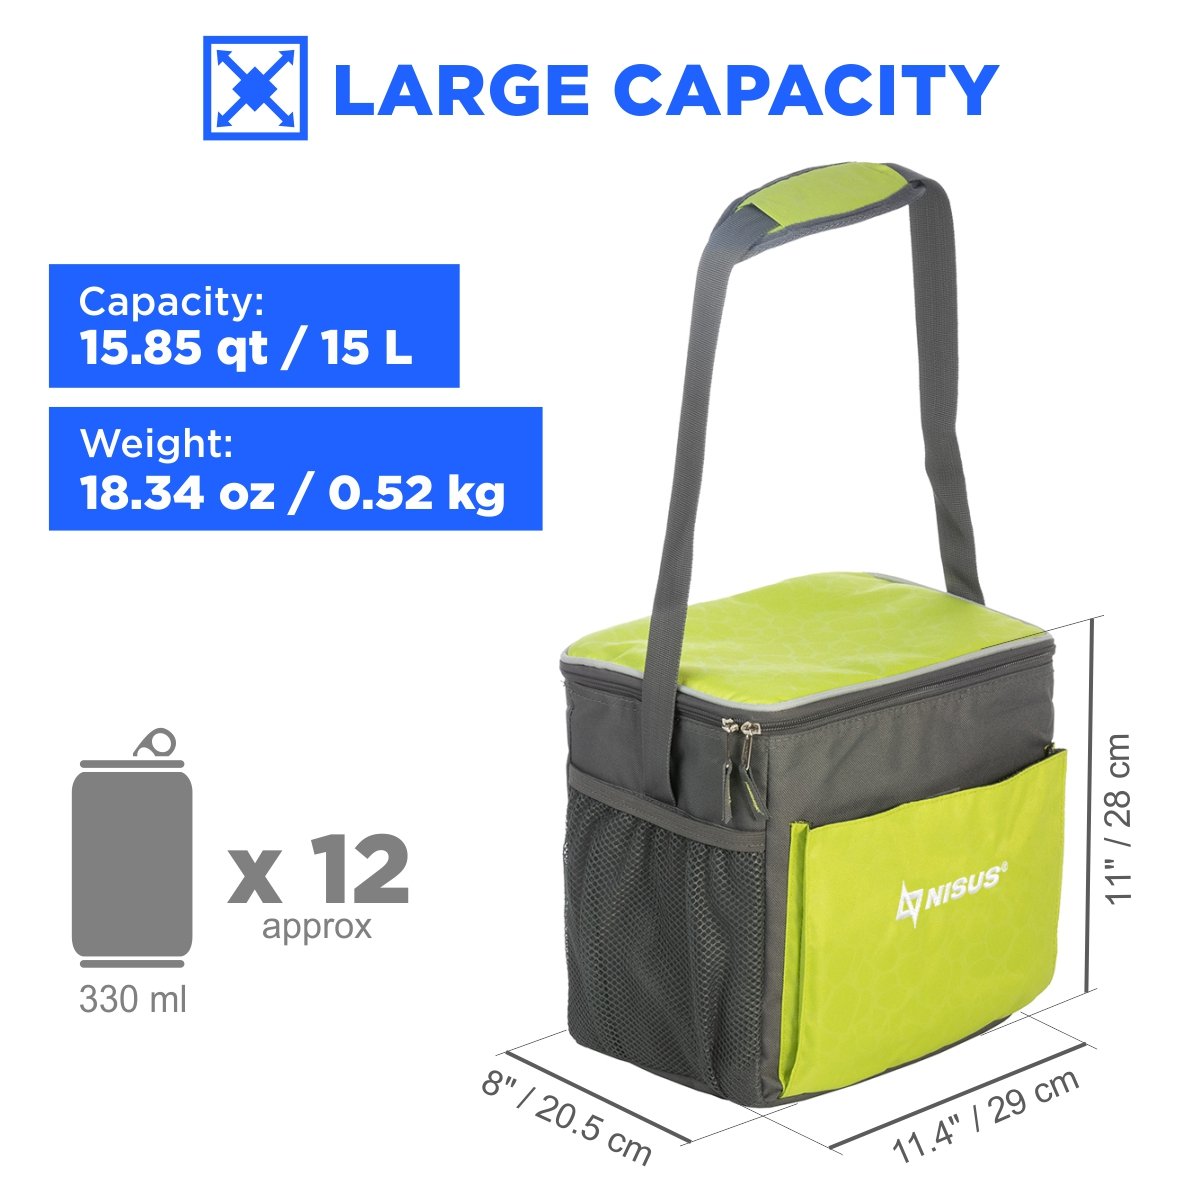 16 qt Beach Soft Sided Cooler Bag for 12 cans weighs less 18 oz, it is 11.4 inches long, 8 inches wide and 11 inches high